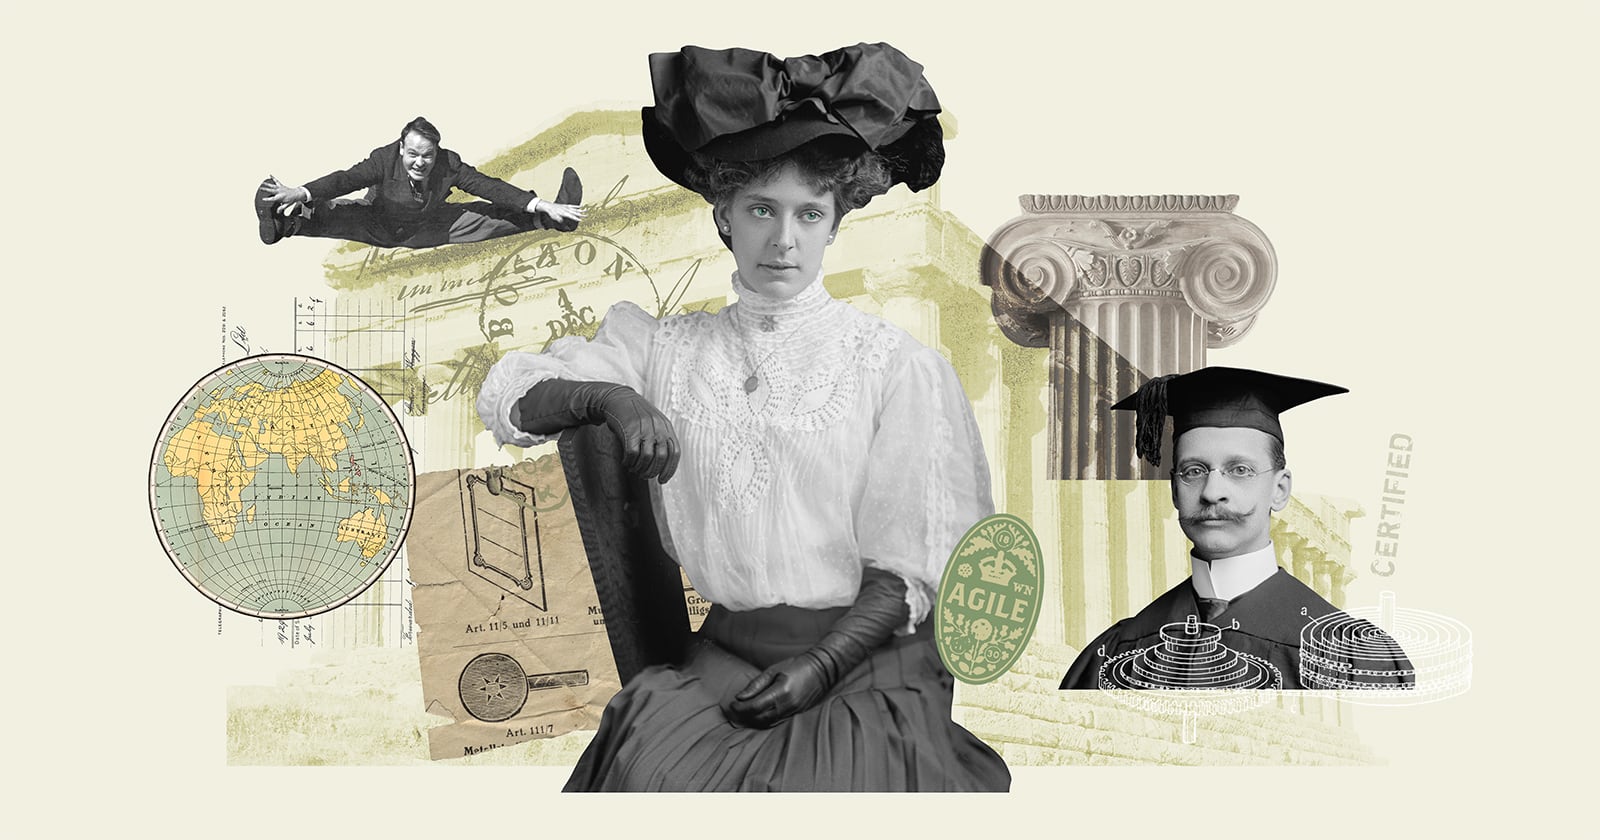 Aglie Certification Collage Image with vintage photos of a woman and graduate